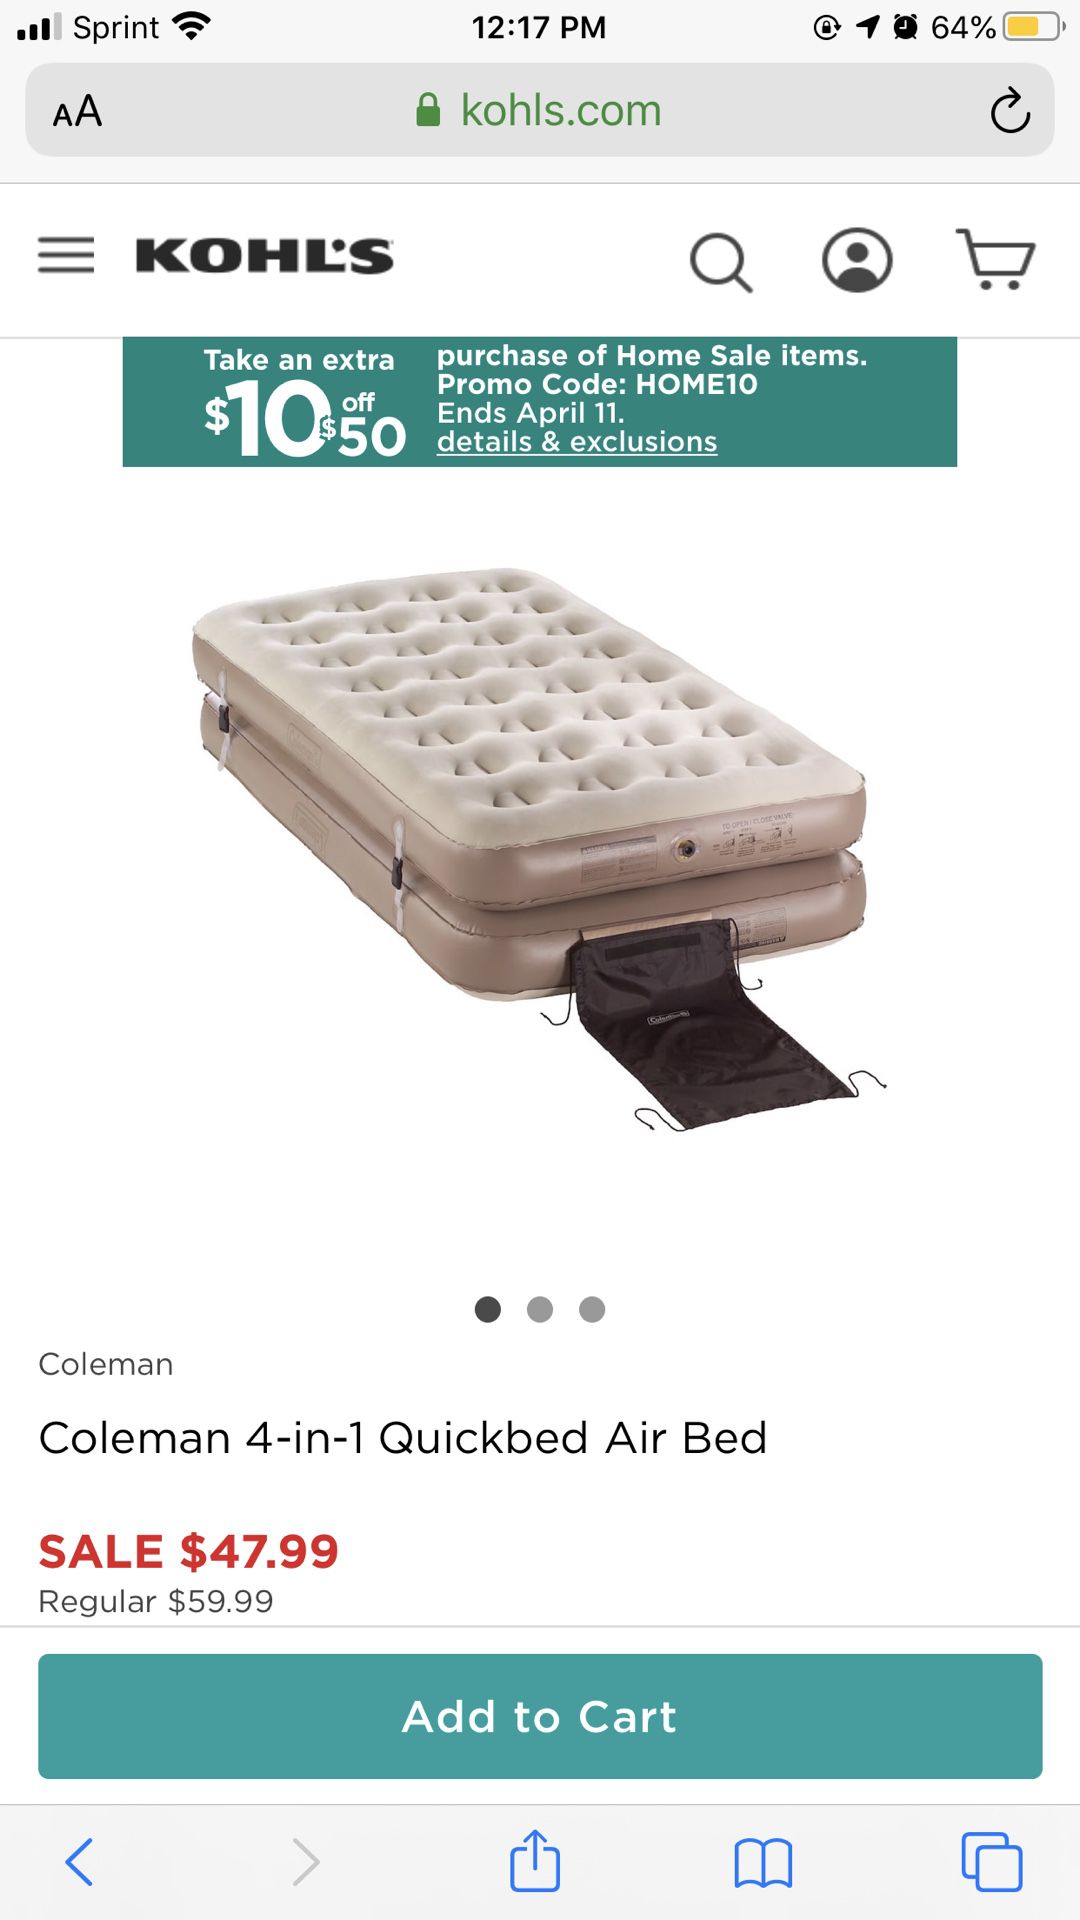 Coleman 4-in-1 Quickbed Air Bed - Air Mattress